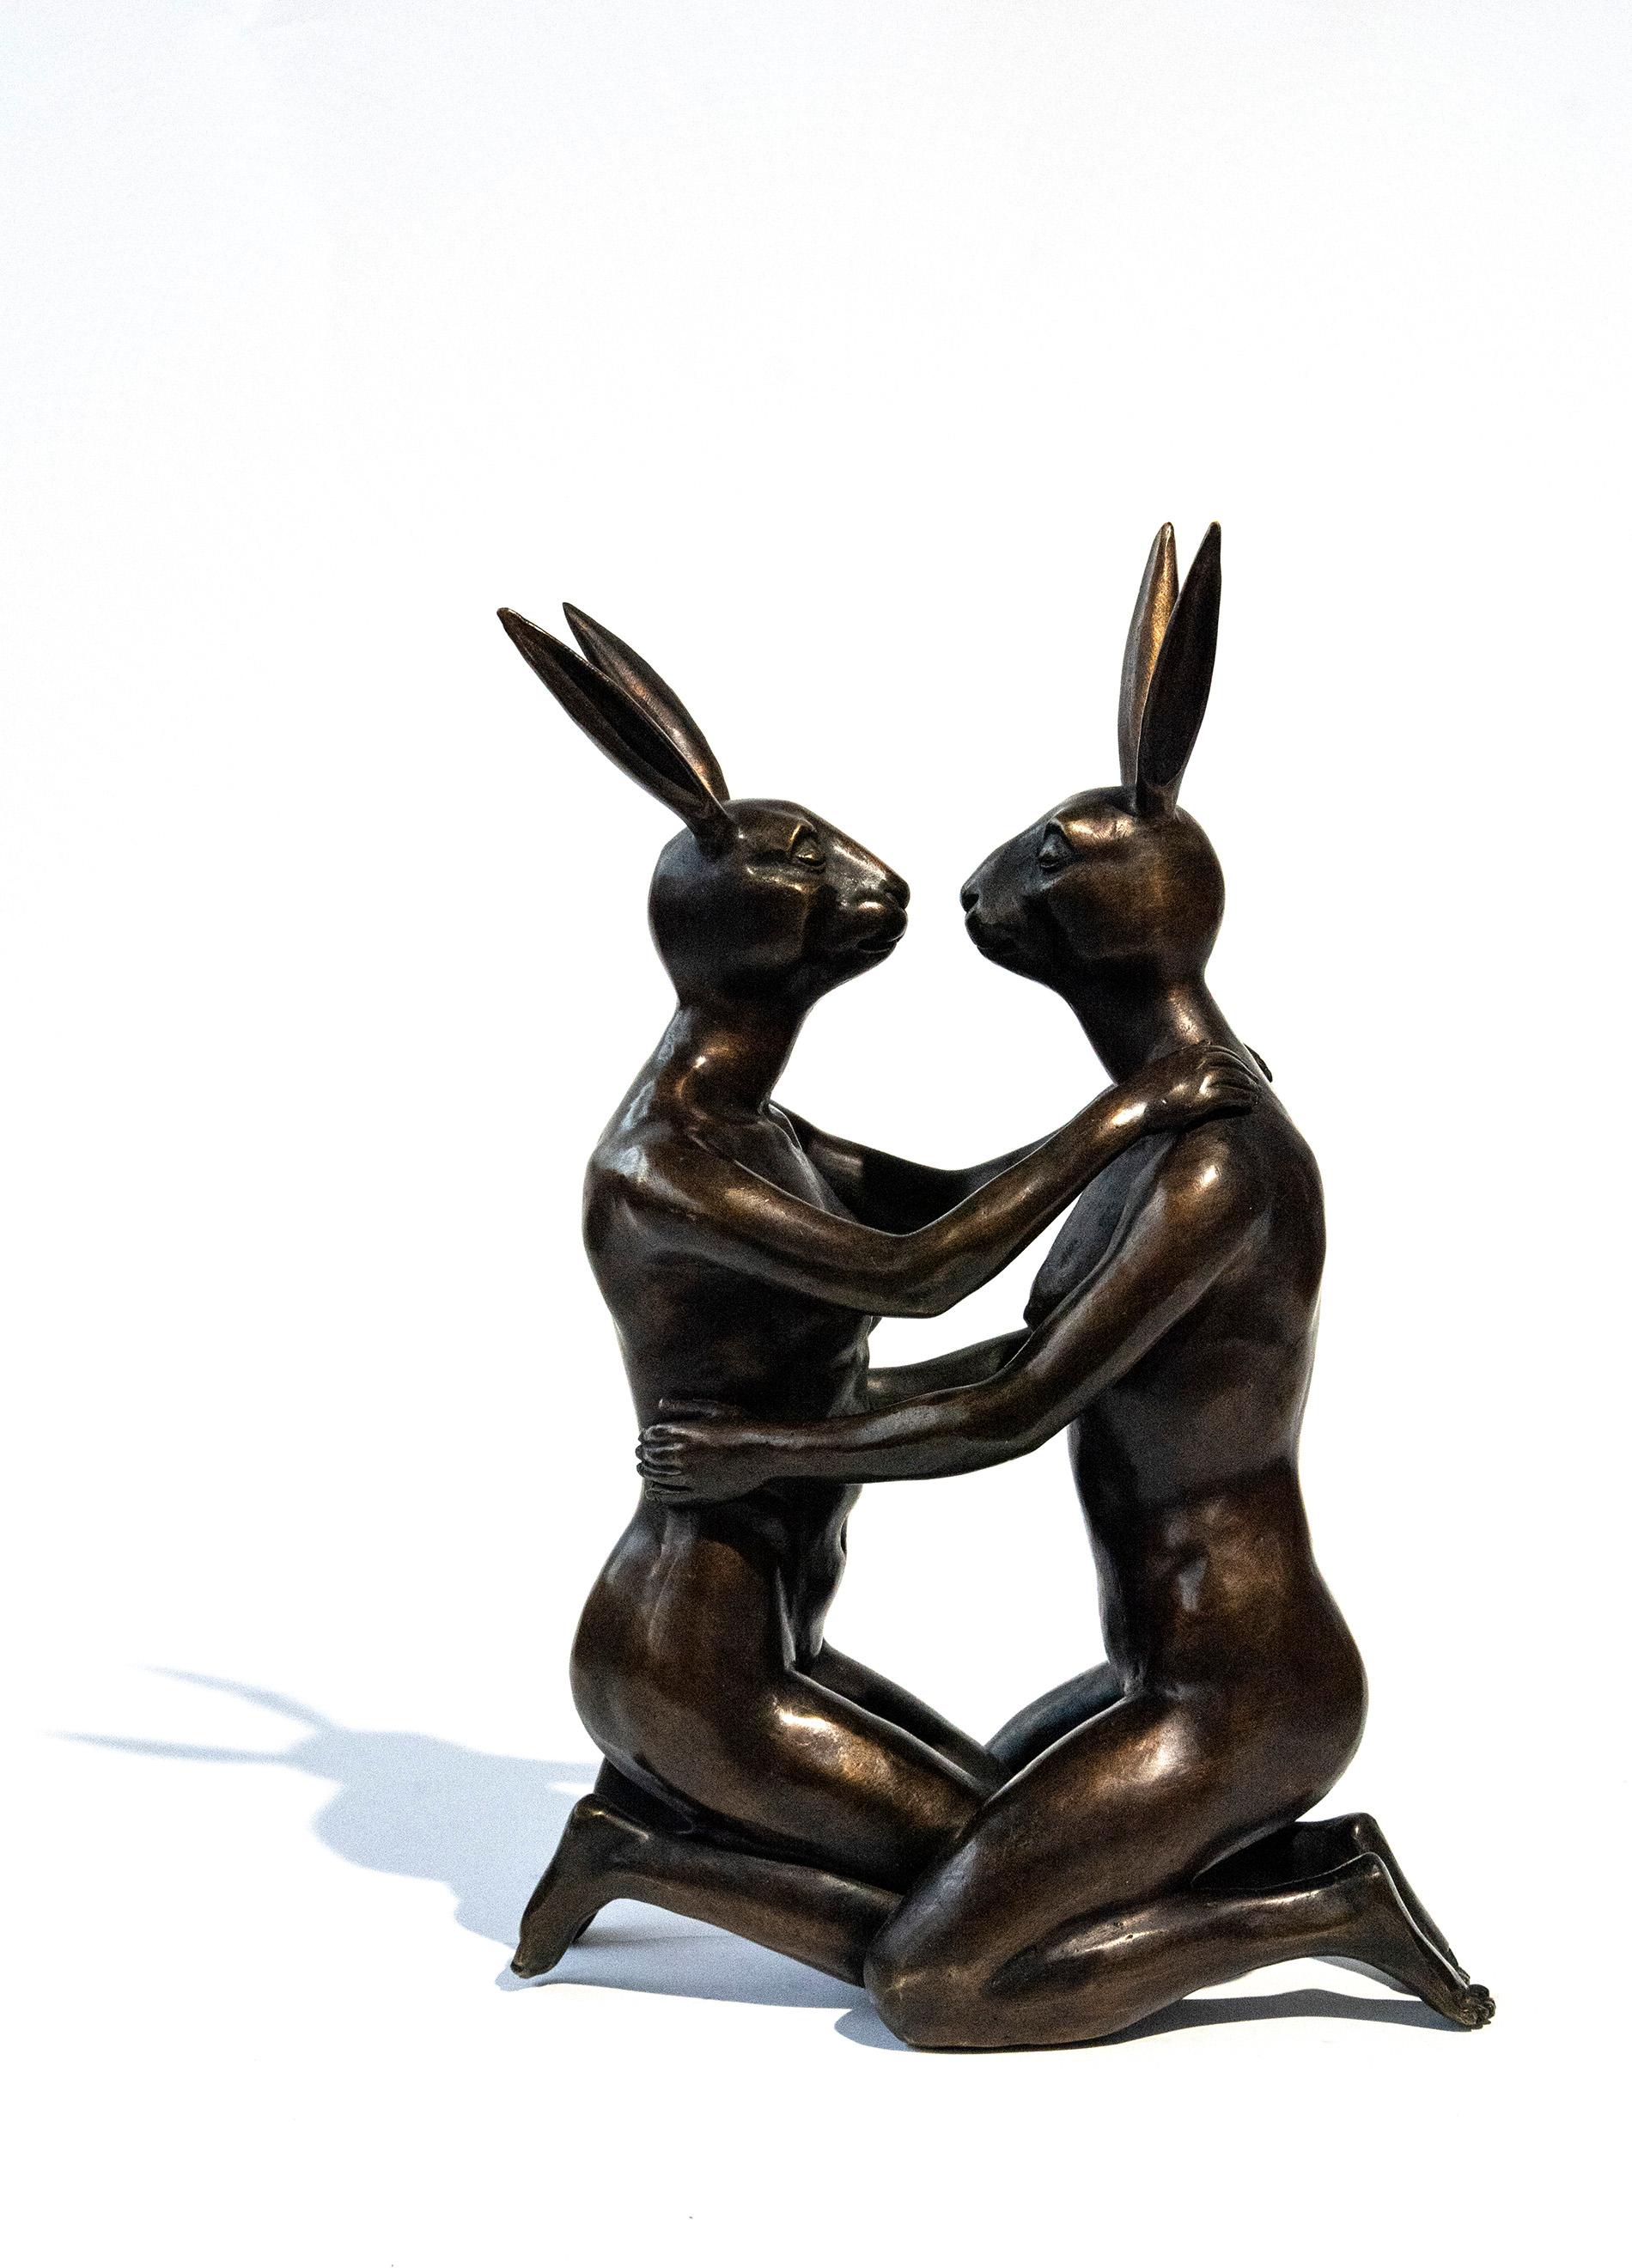 She loved being in love 7/30 - playful, figurative bronze sculpture For Sale 1